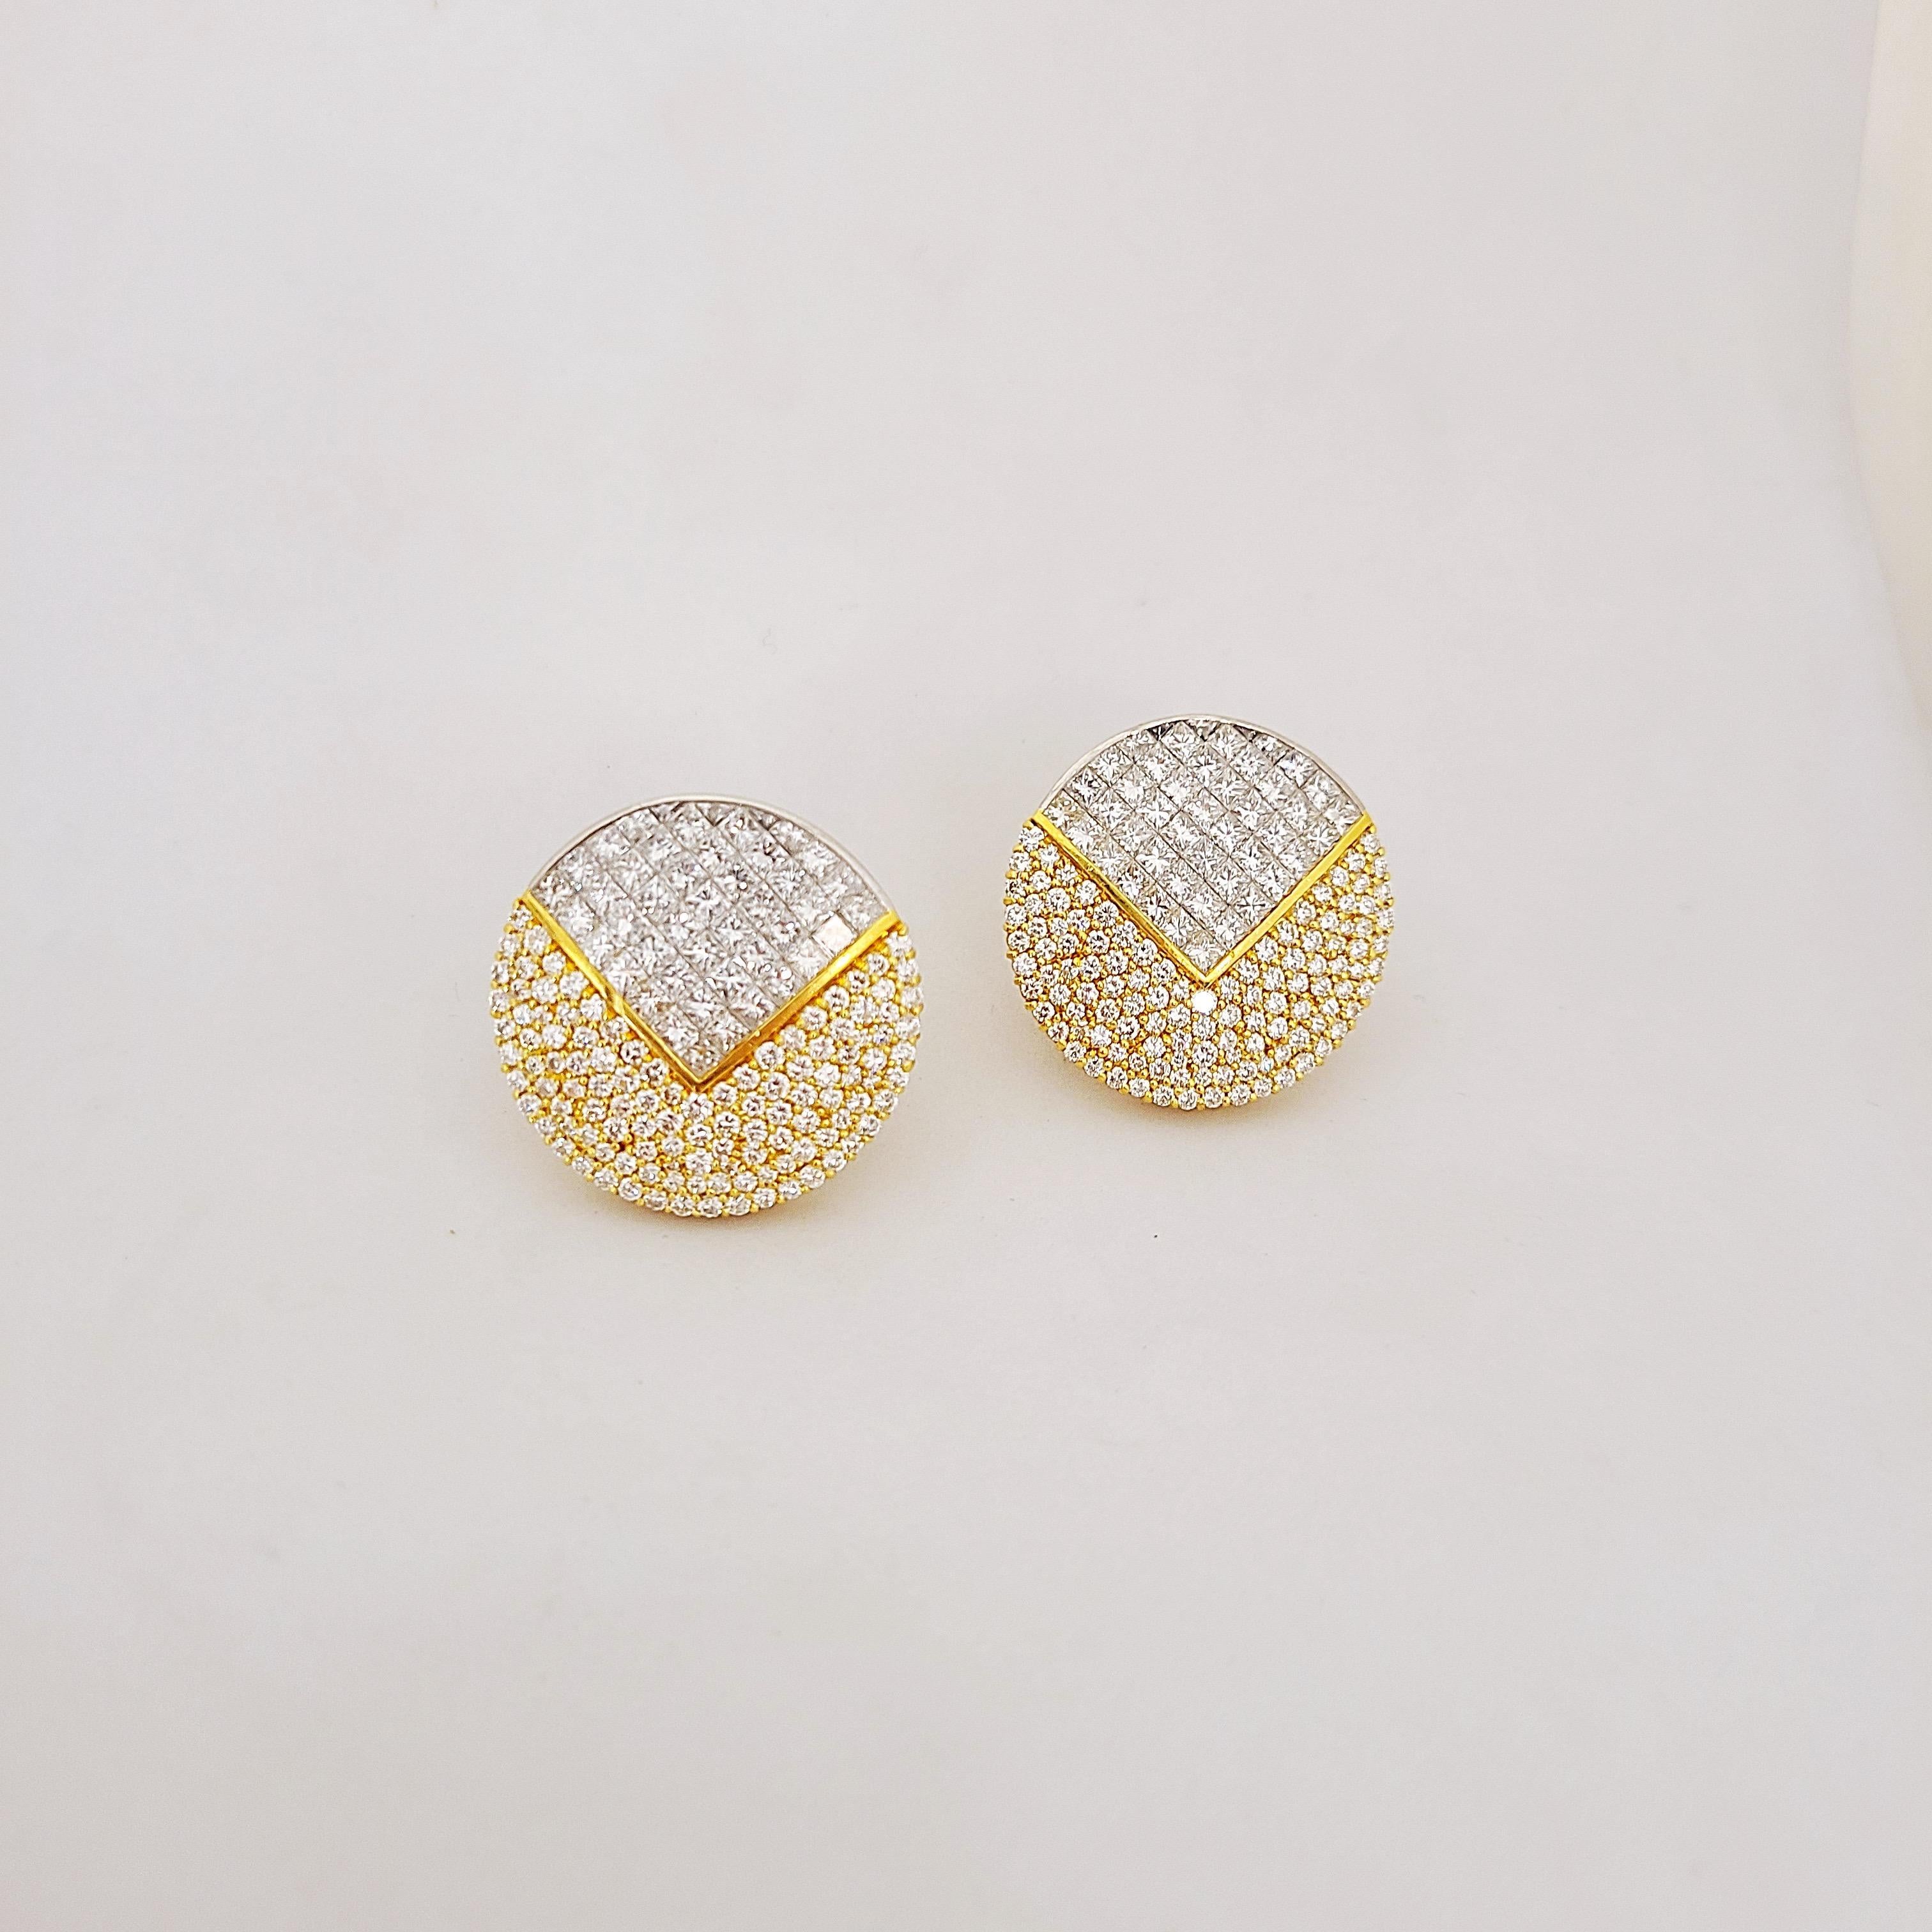 These vibrant earrings are composed of 18KT yellow gold and Platinum, Set with a section of invisibly set  diamonds (11.16Ct.) and a section of round brilliants (3.41Ct.) This classic shape is easy to wear, and the combination of Gold with Platinum,